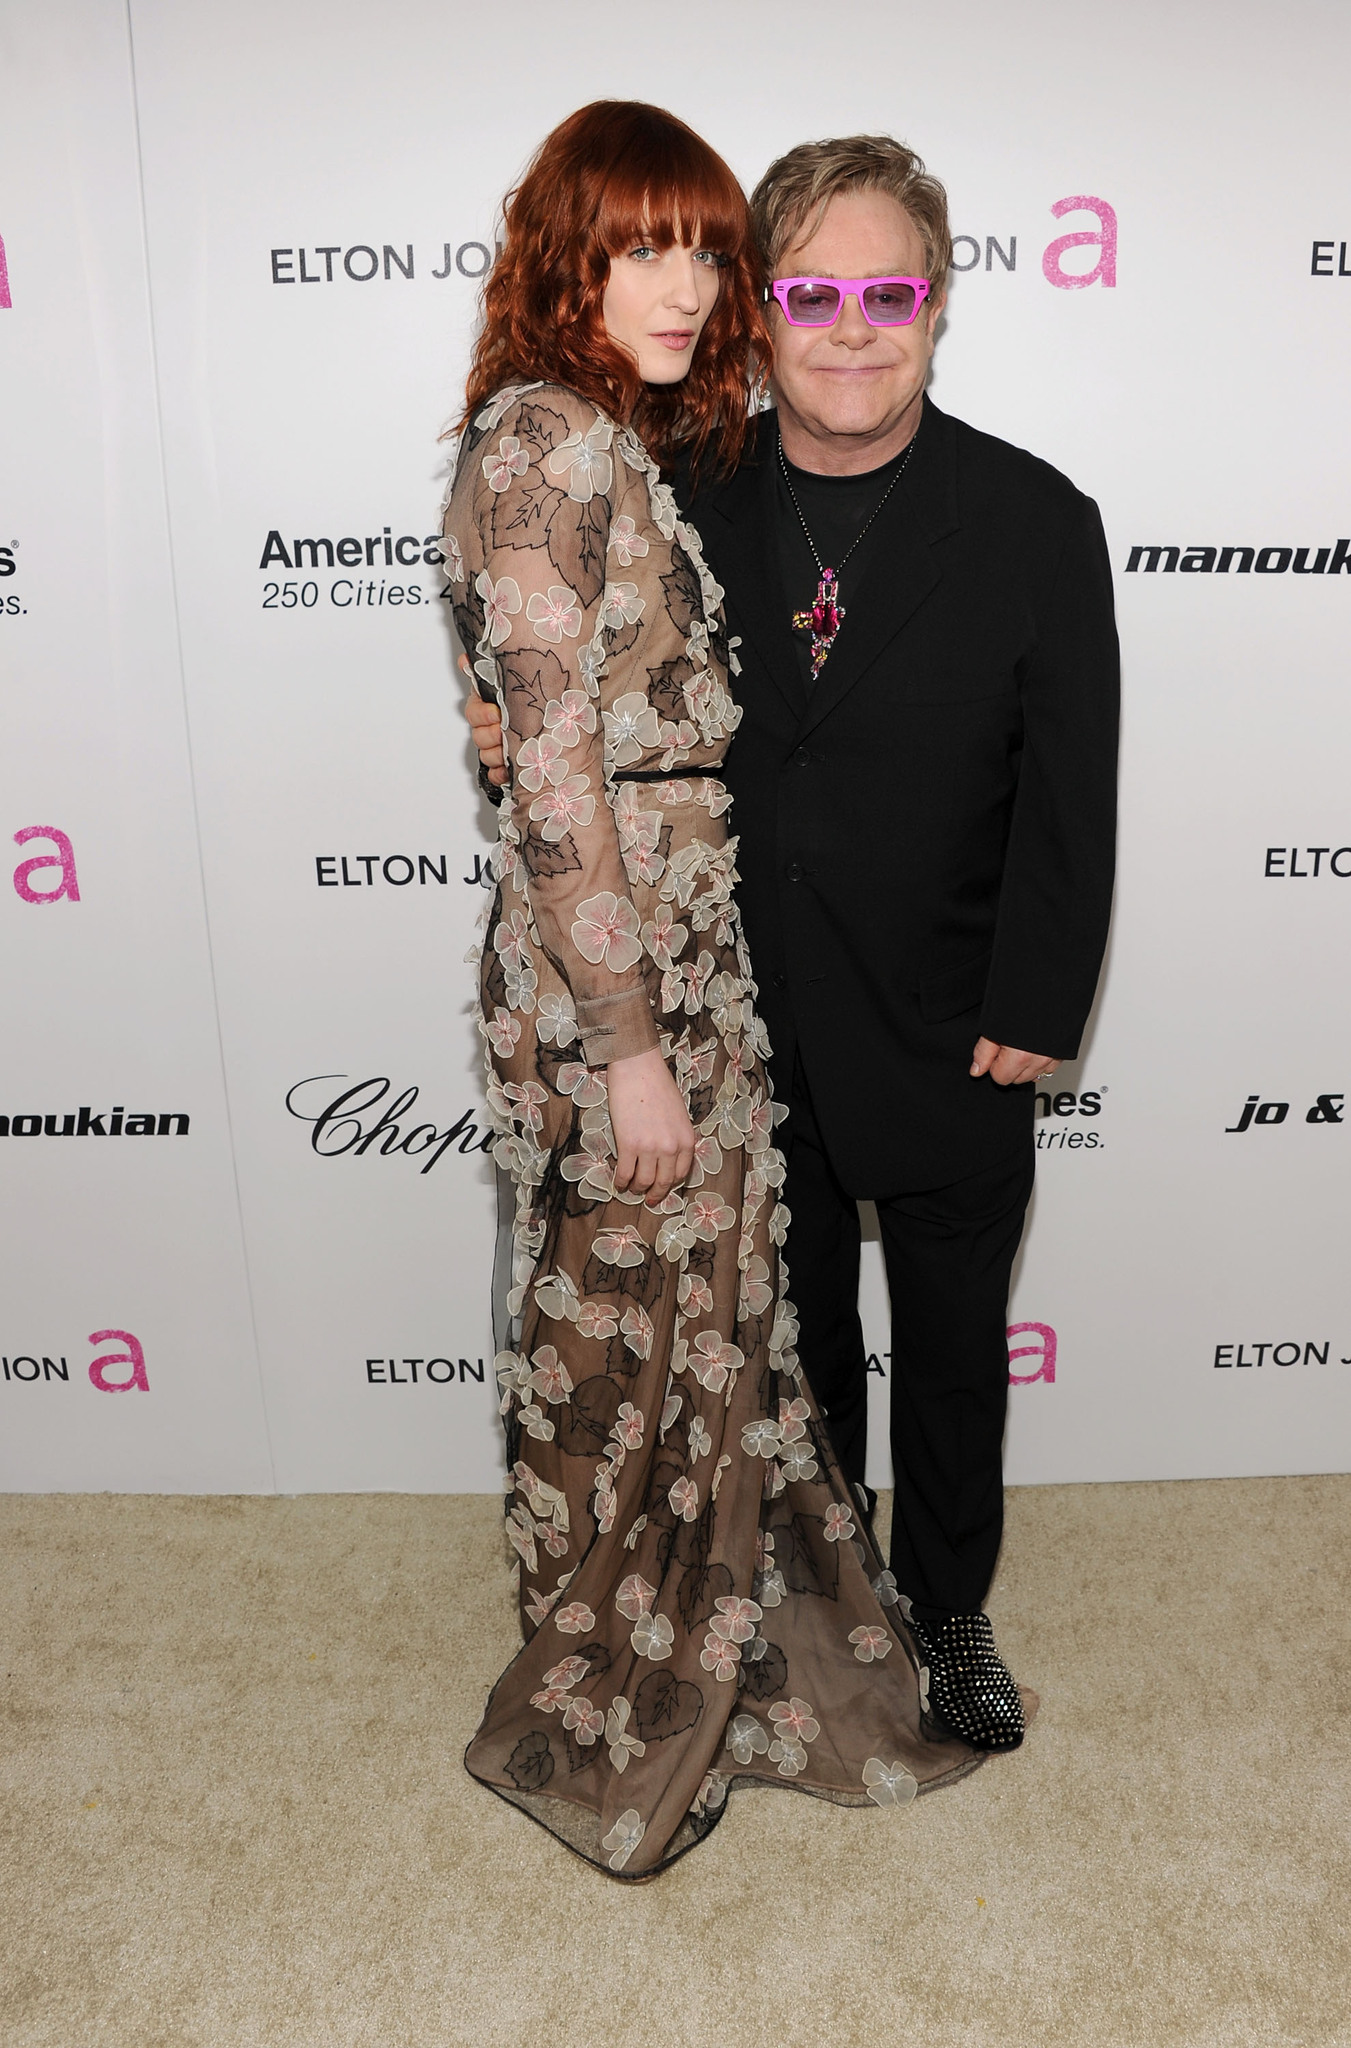 Elton John and Florence Welch